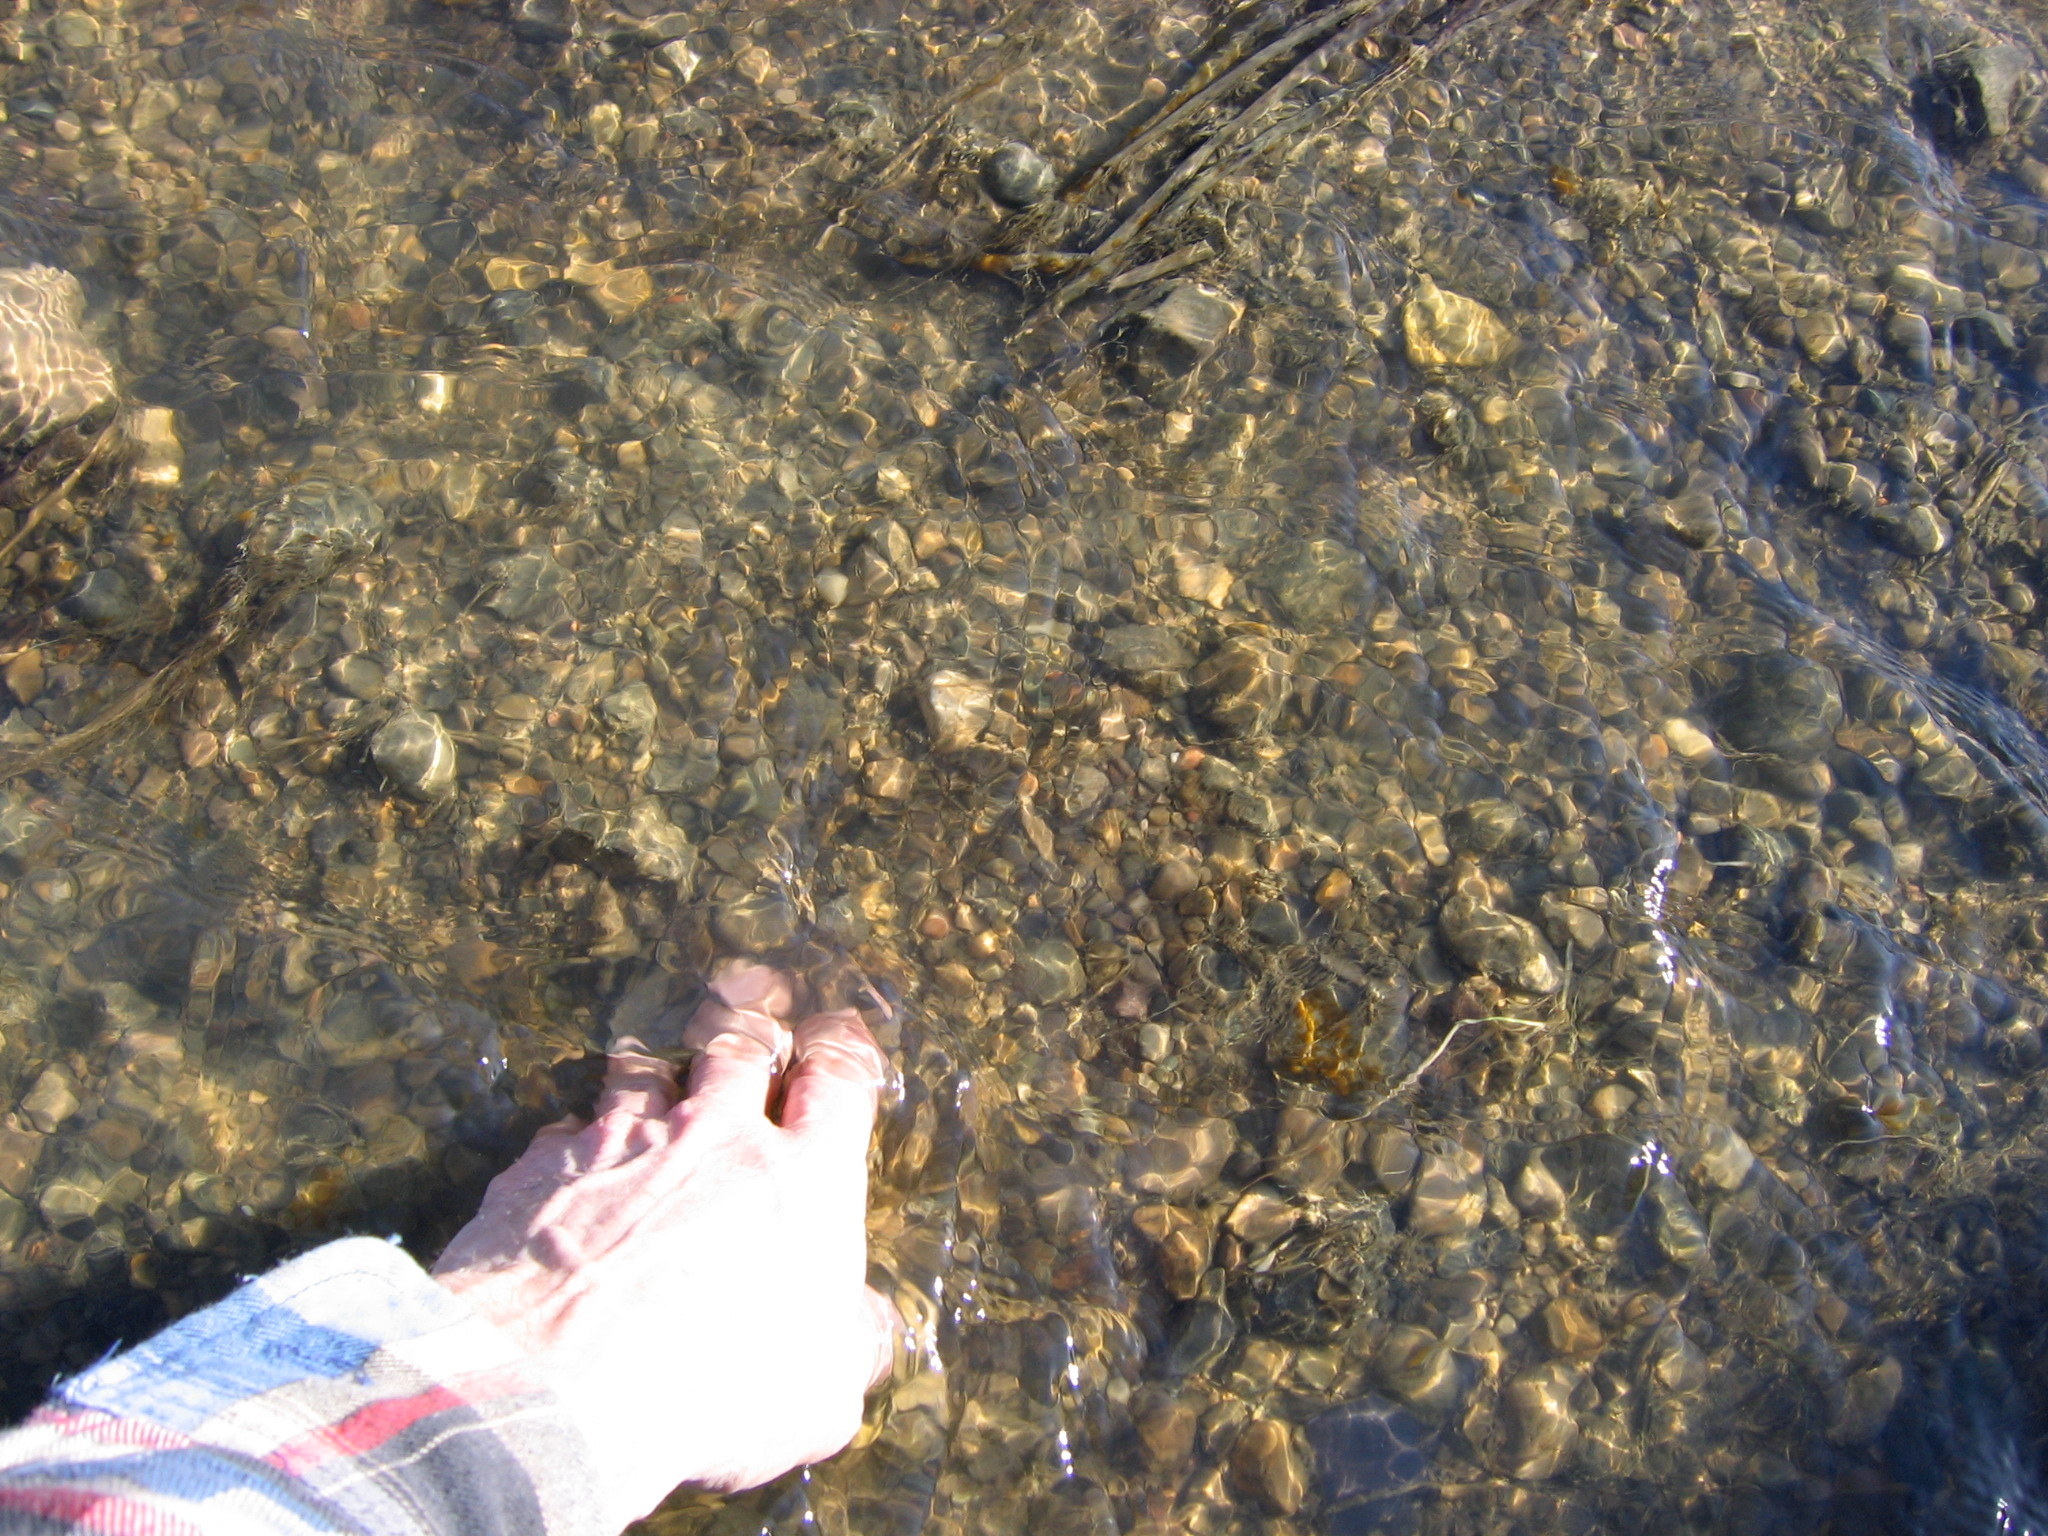 the foot of a person standing in a shallow river